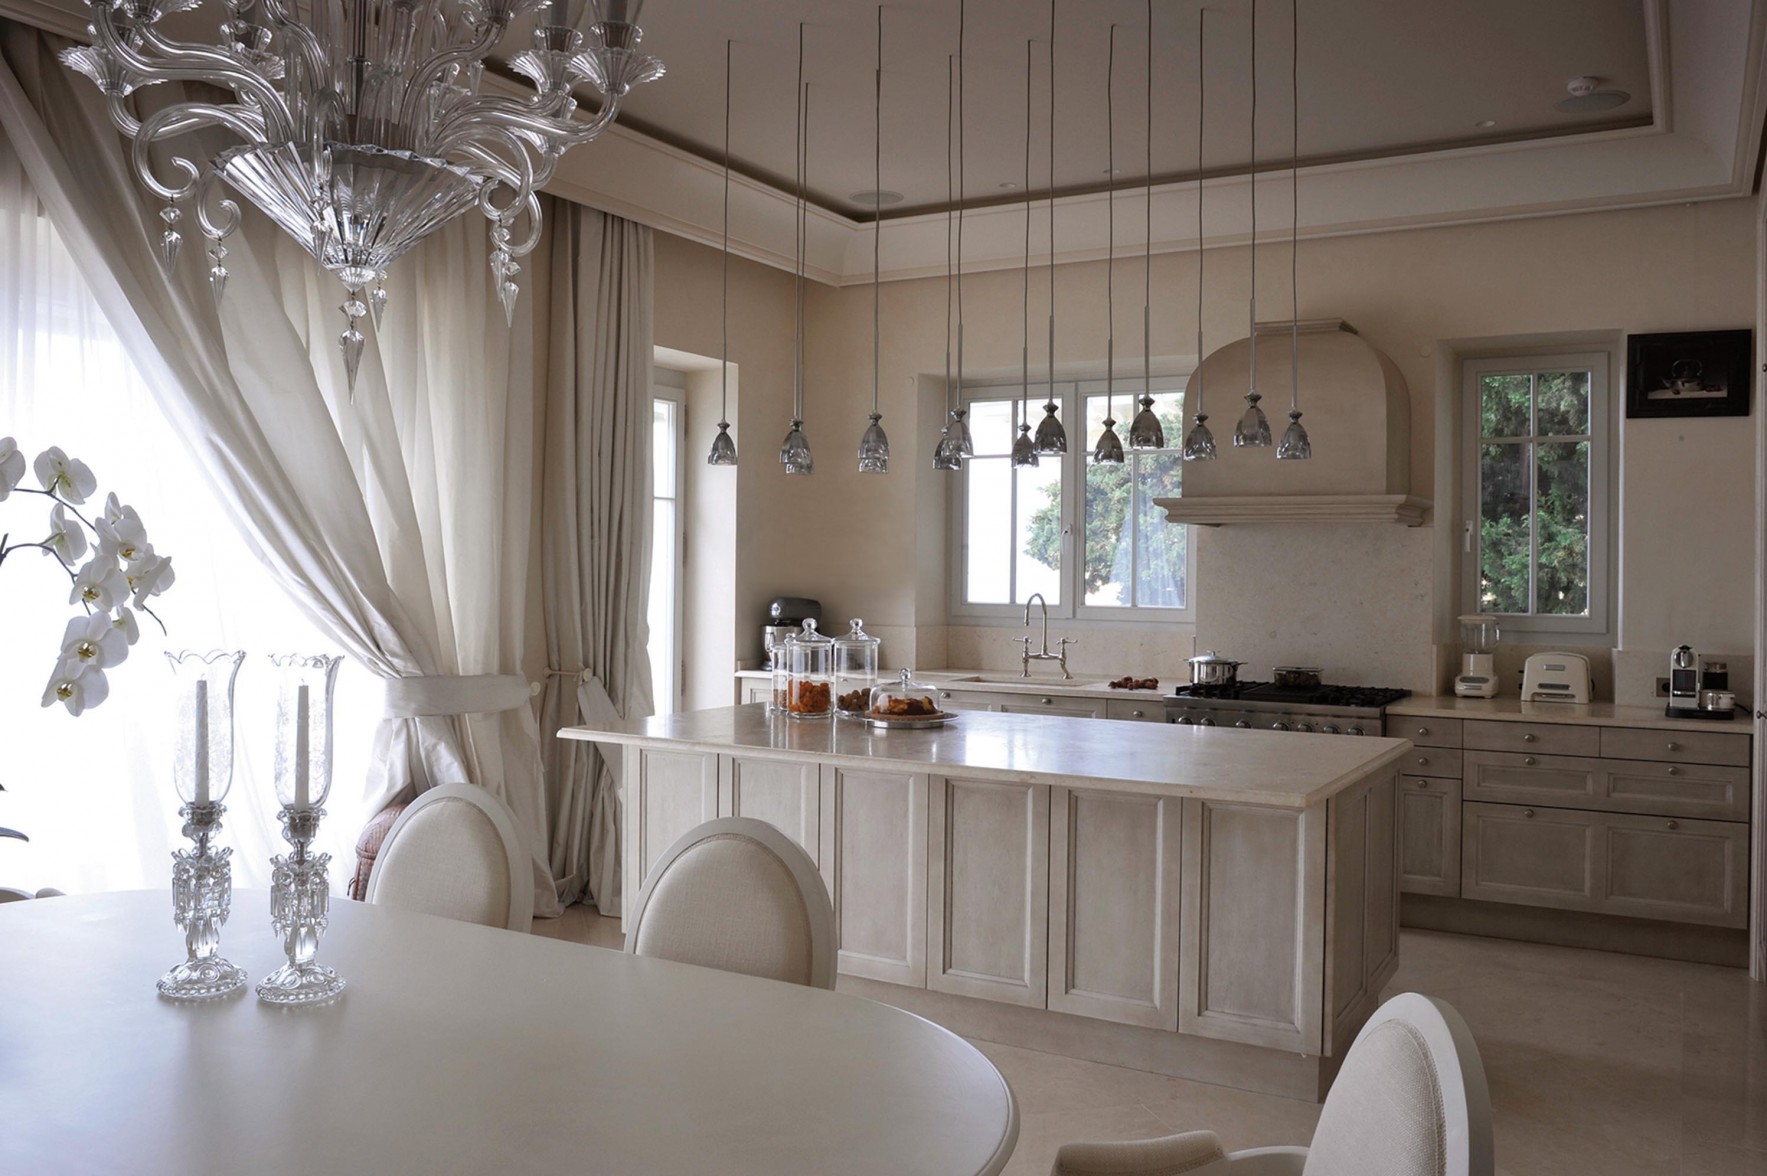 Exclusive materials and excellence in execution for a luxurious kitchen